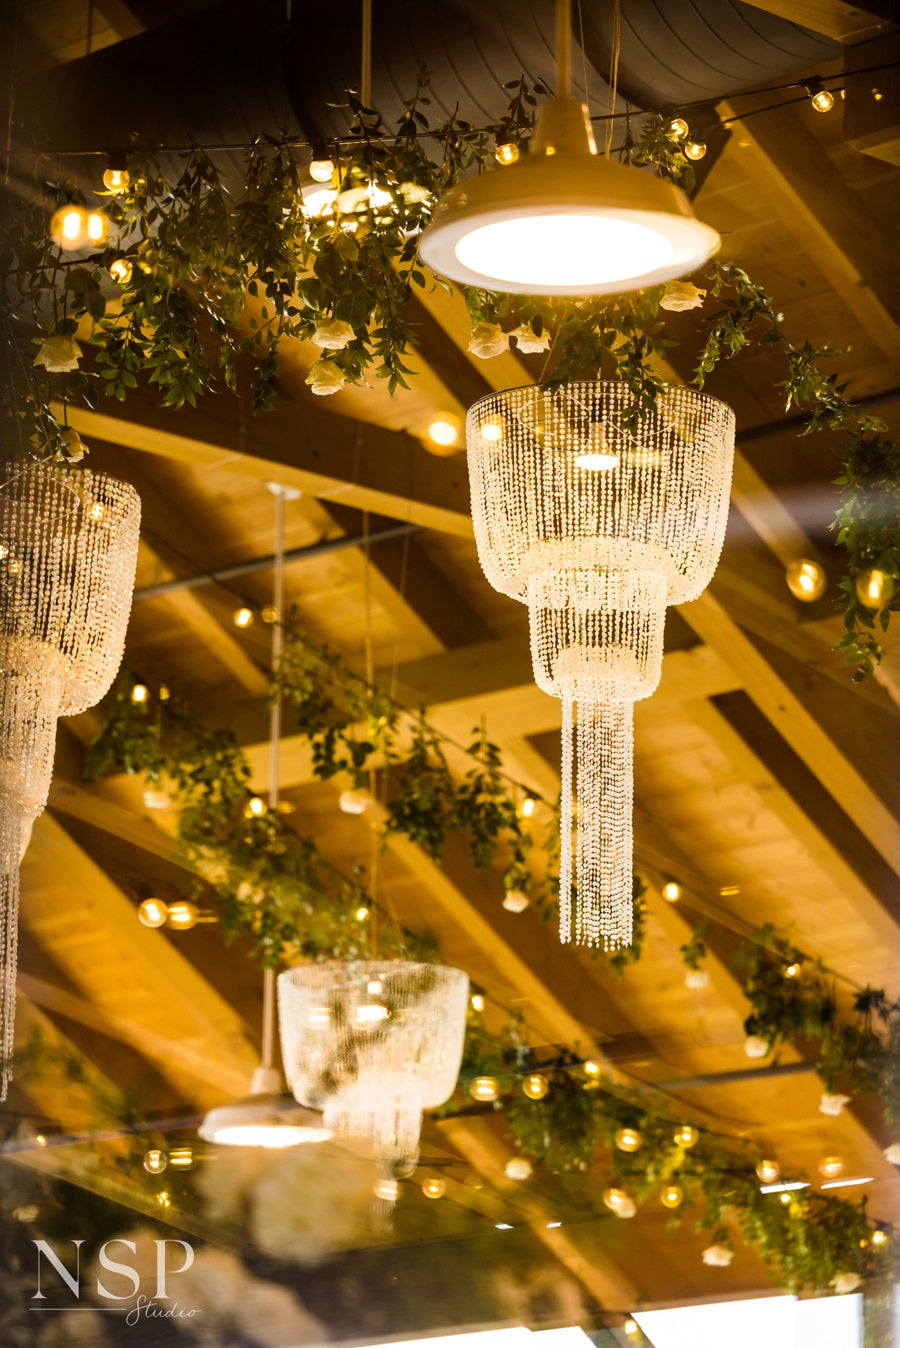 Close up shot of the ceiling, highlighting the chandeliers, string lights, and hanging greenery.